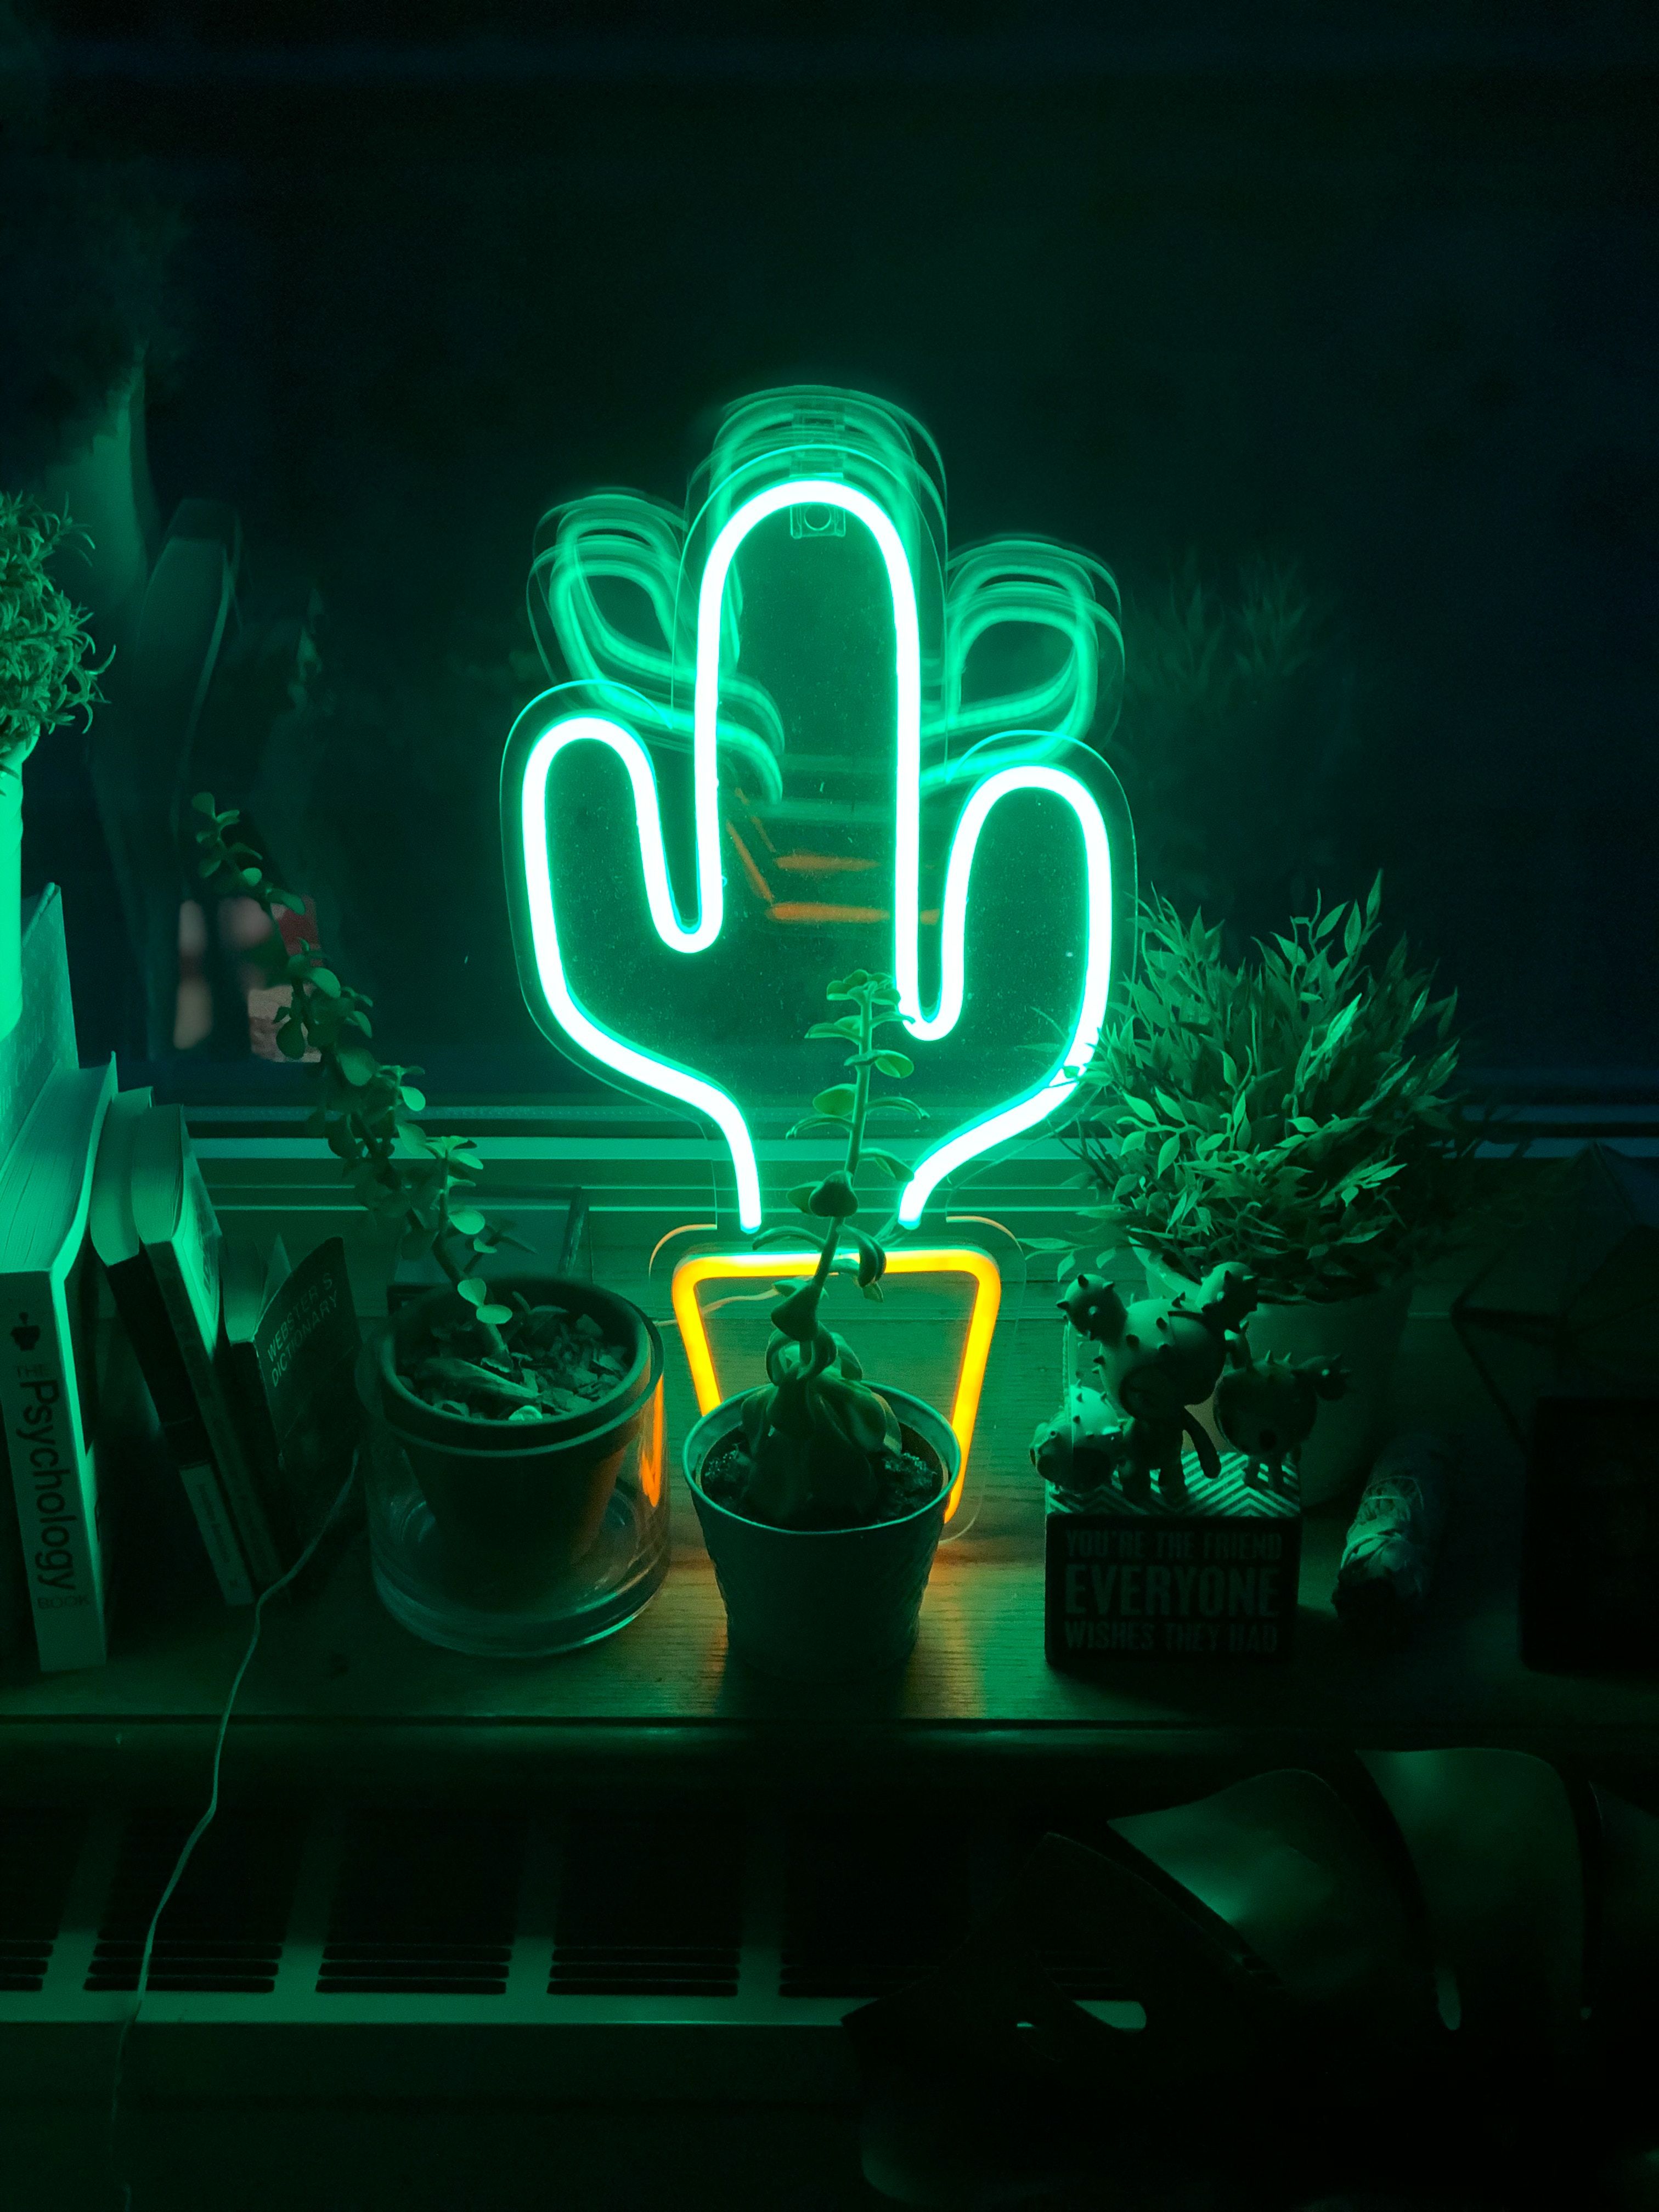 A neon cactus sign on a desk surrounded by potted plants. - Cactus